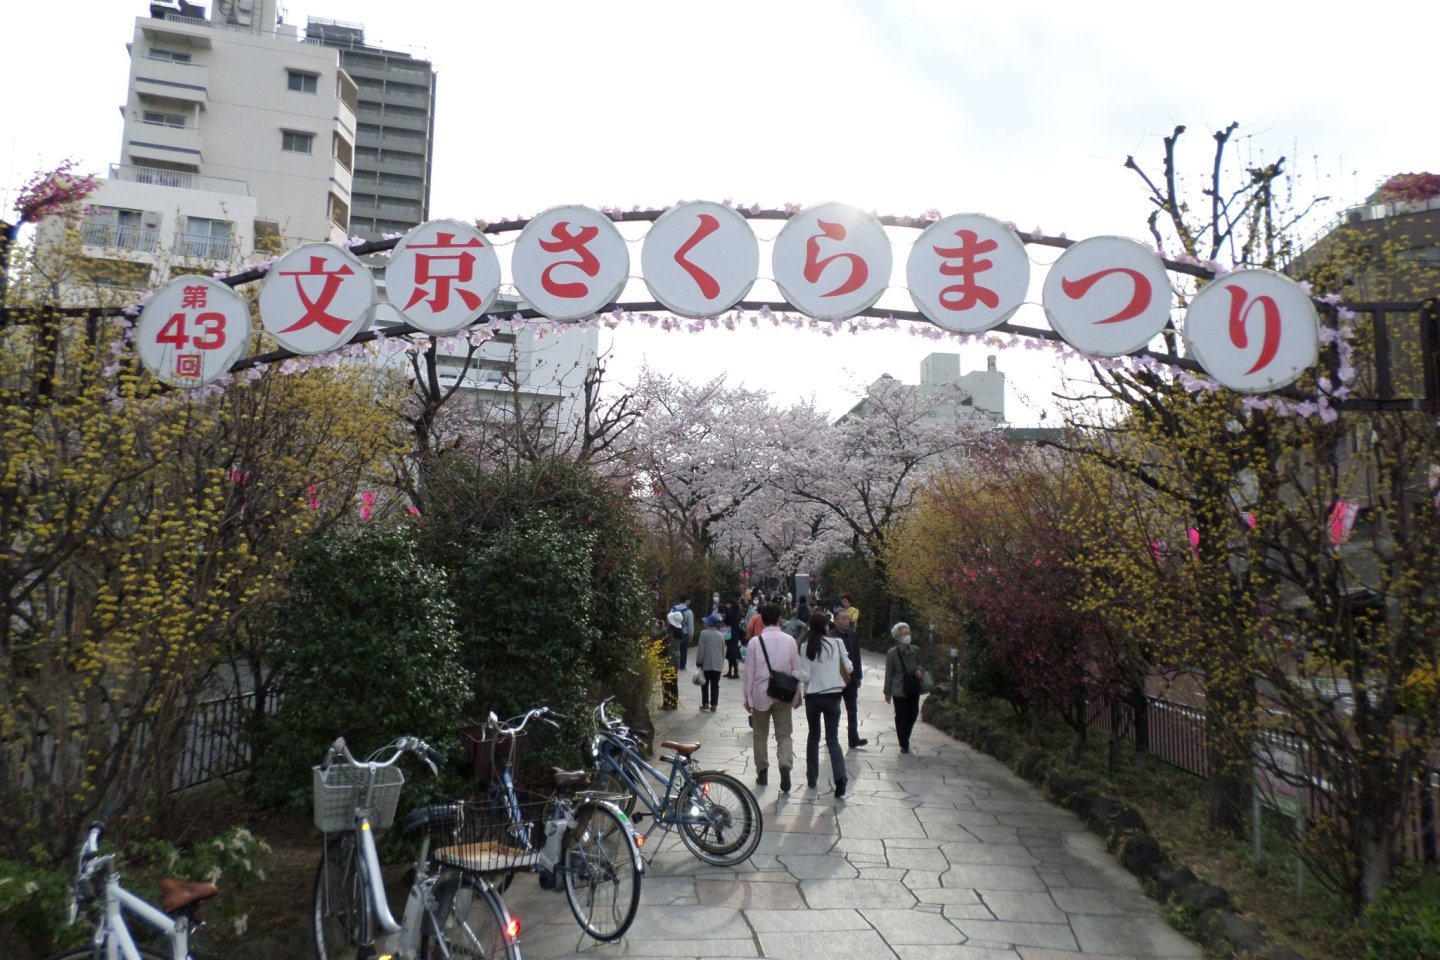 The 43rd annual Bunkyo Cherry Blossom Festival held was on March 29, 2014.